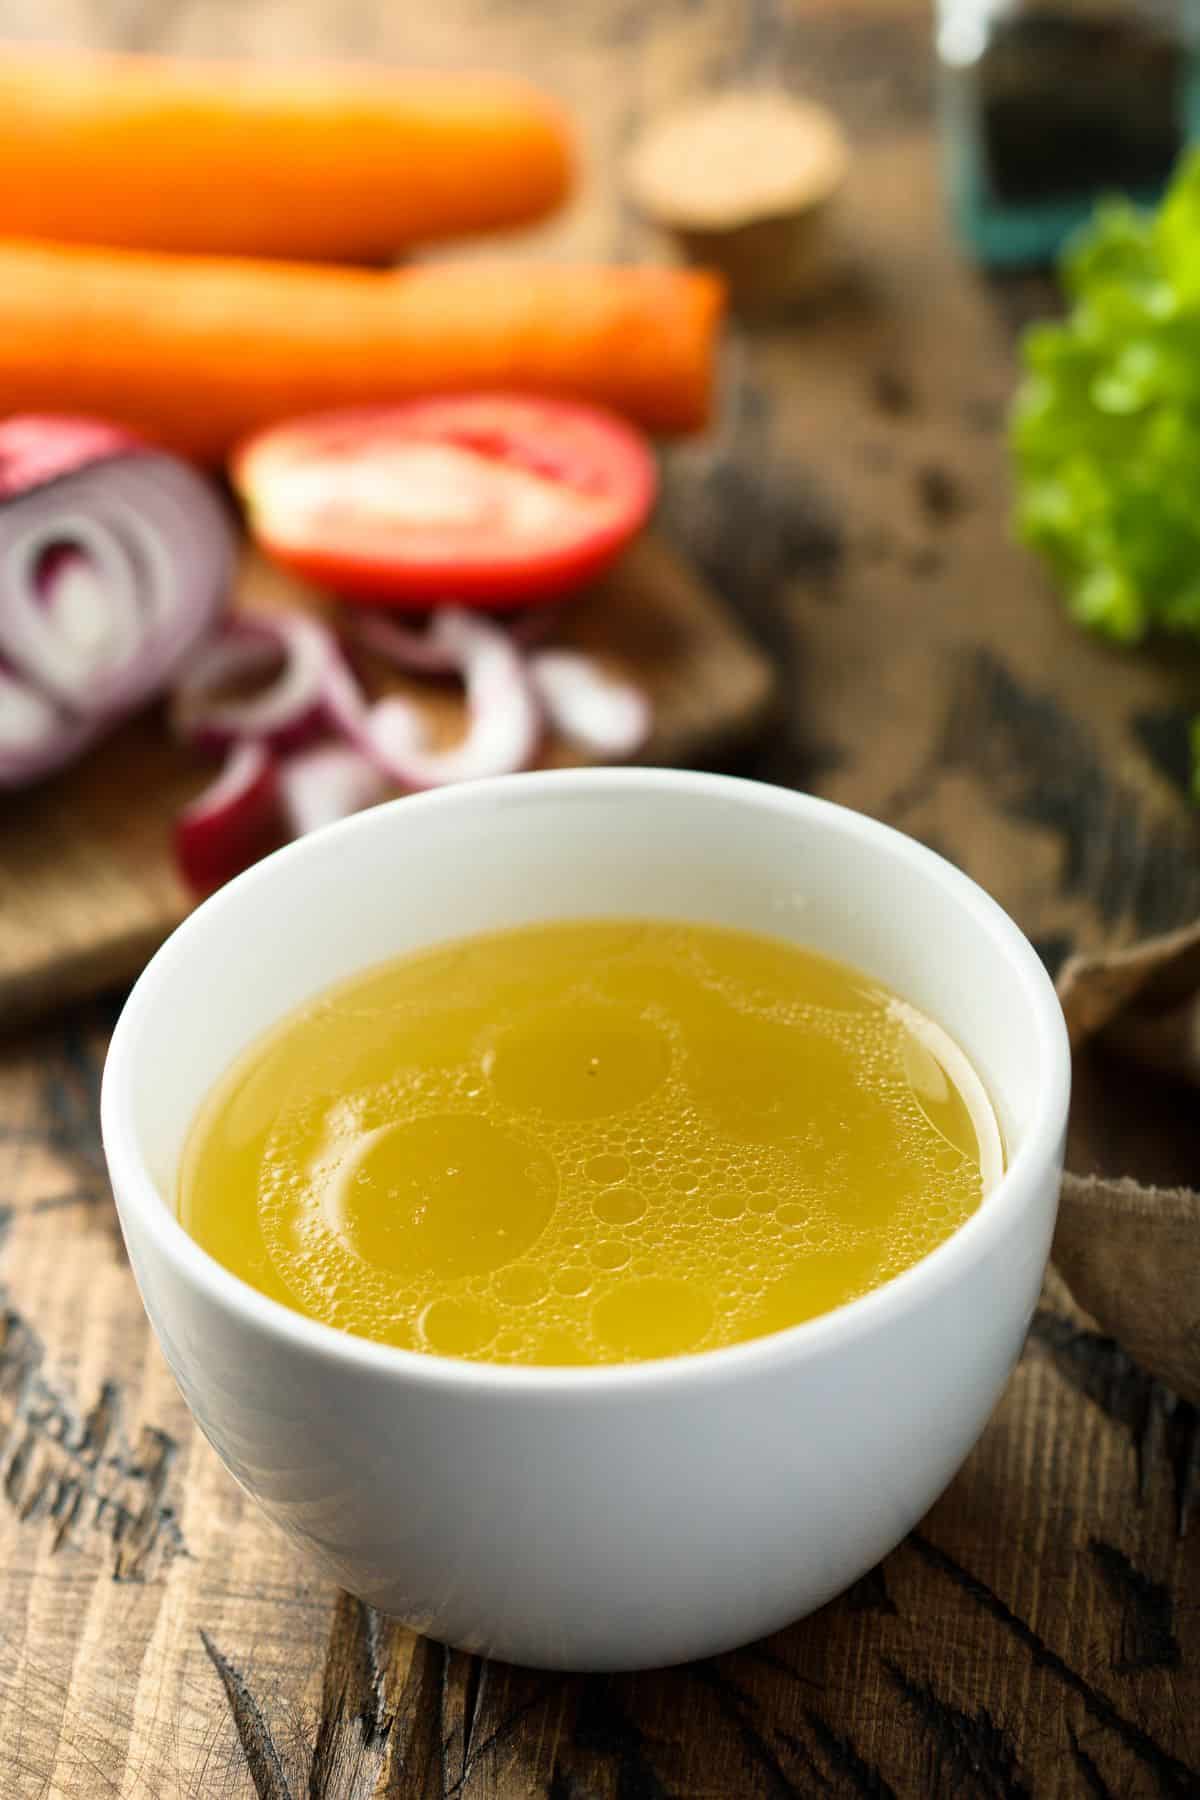 Bowl of chicken stock with cutting board and vegetables.